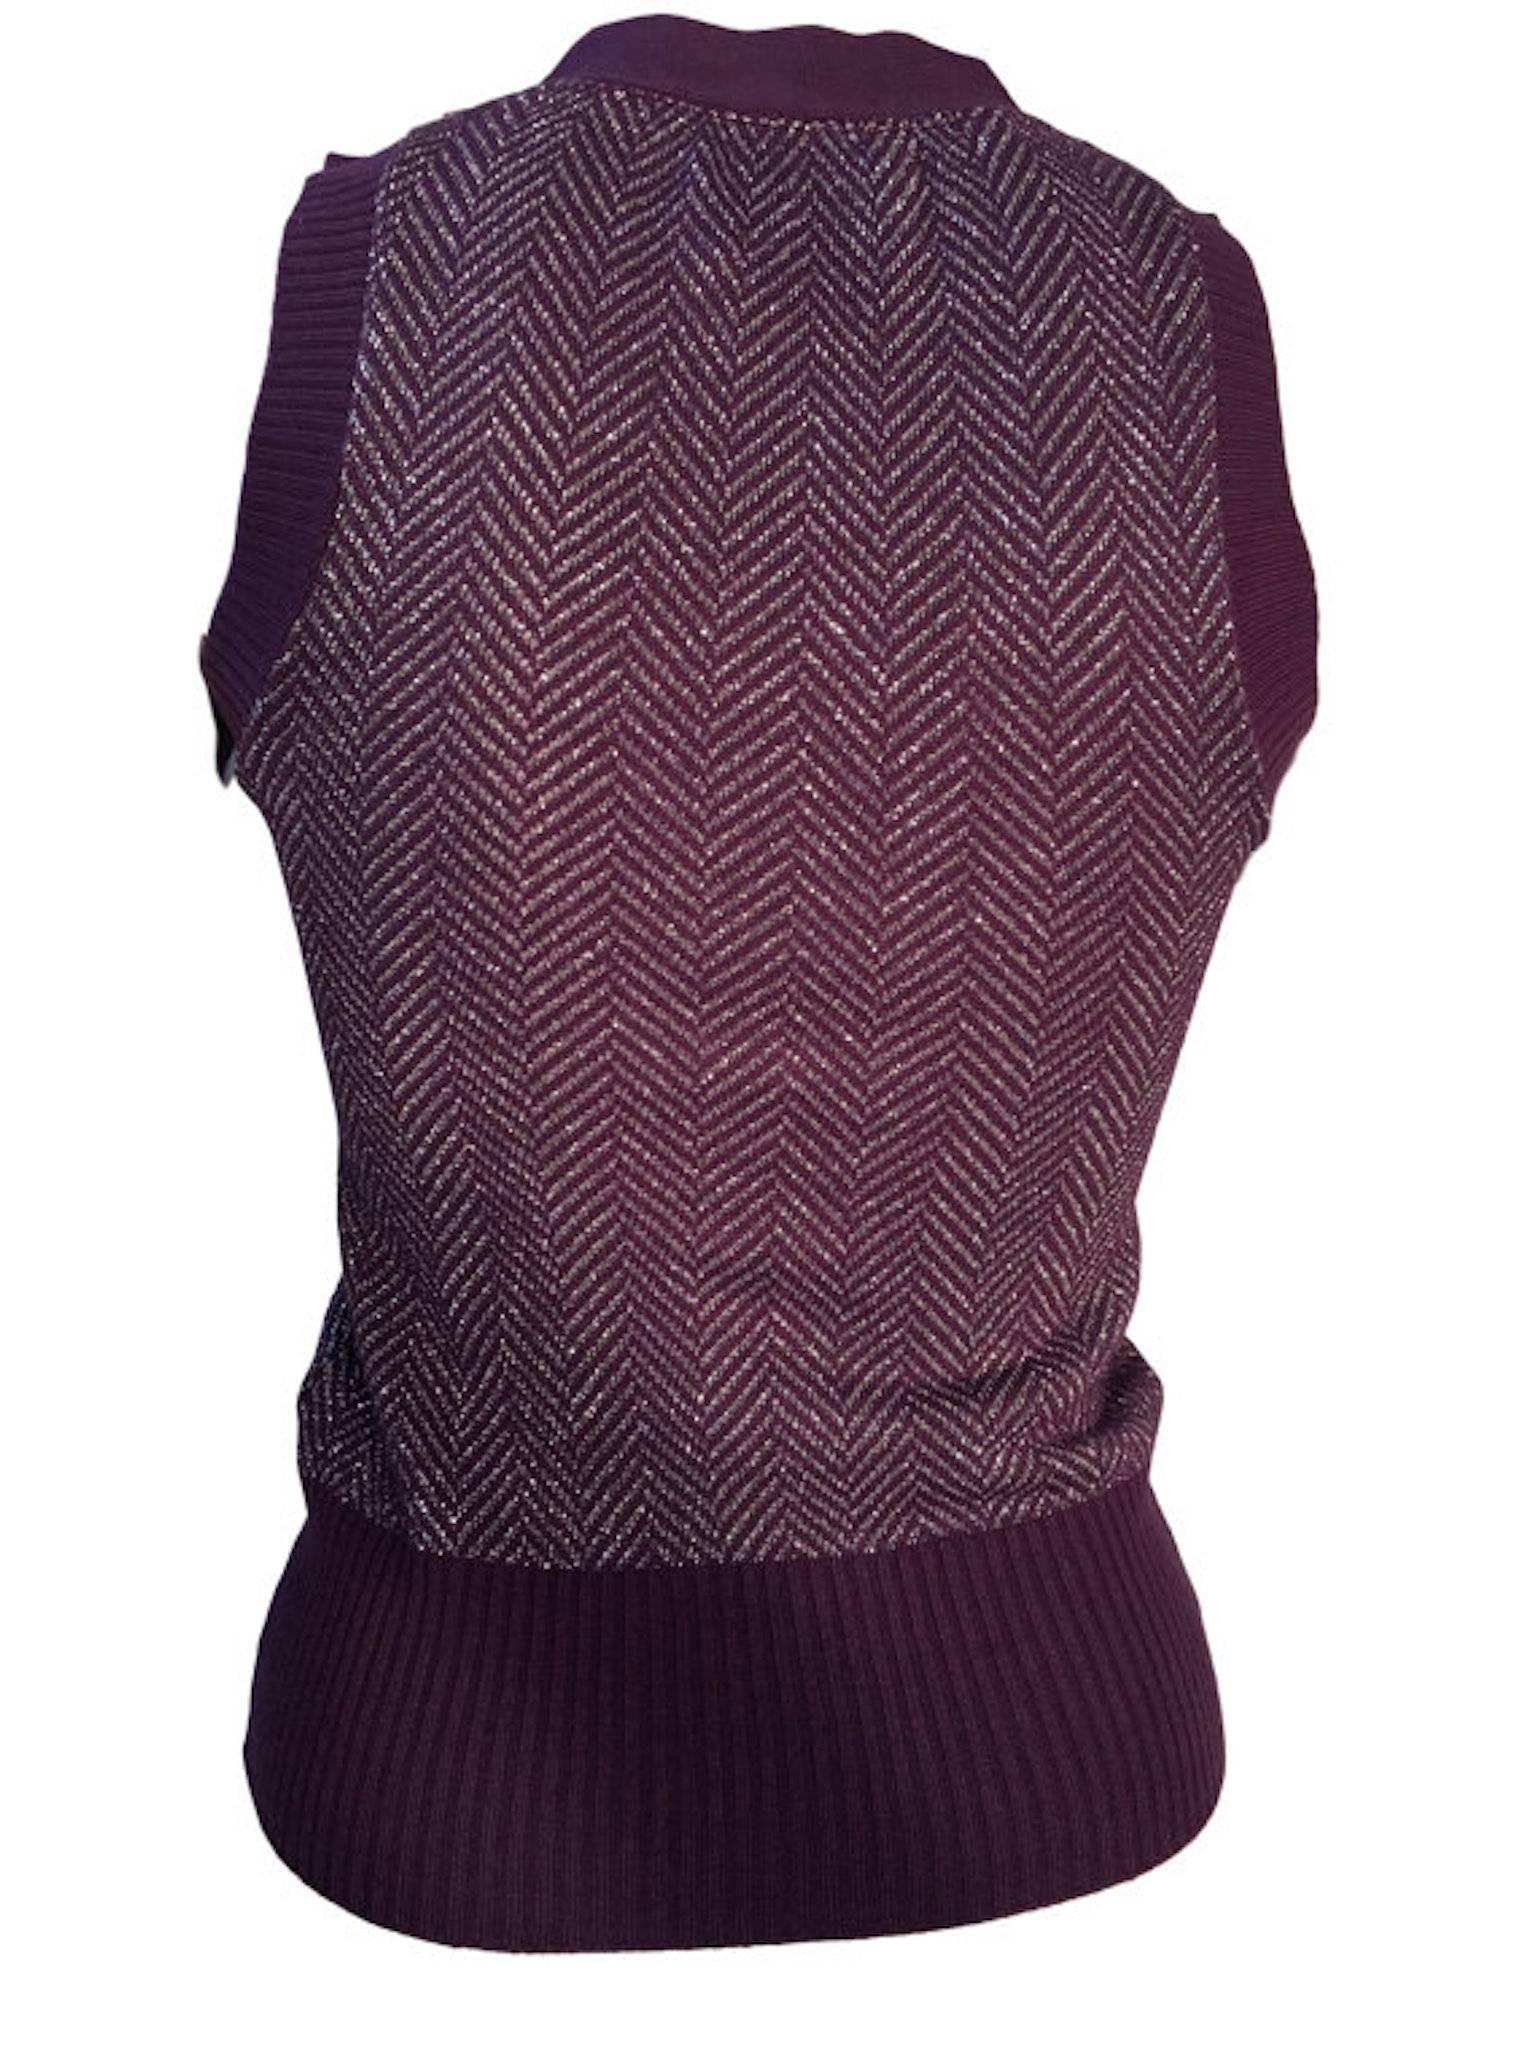 Original vintage Biba purple and silver herringbone knitted tank top/sleeveless cardigan. With button fastening.

Size UK 6 measures 14 inches across bust and 22 inches length. 

Excellent condition